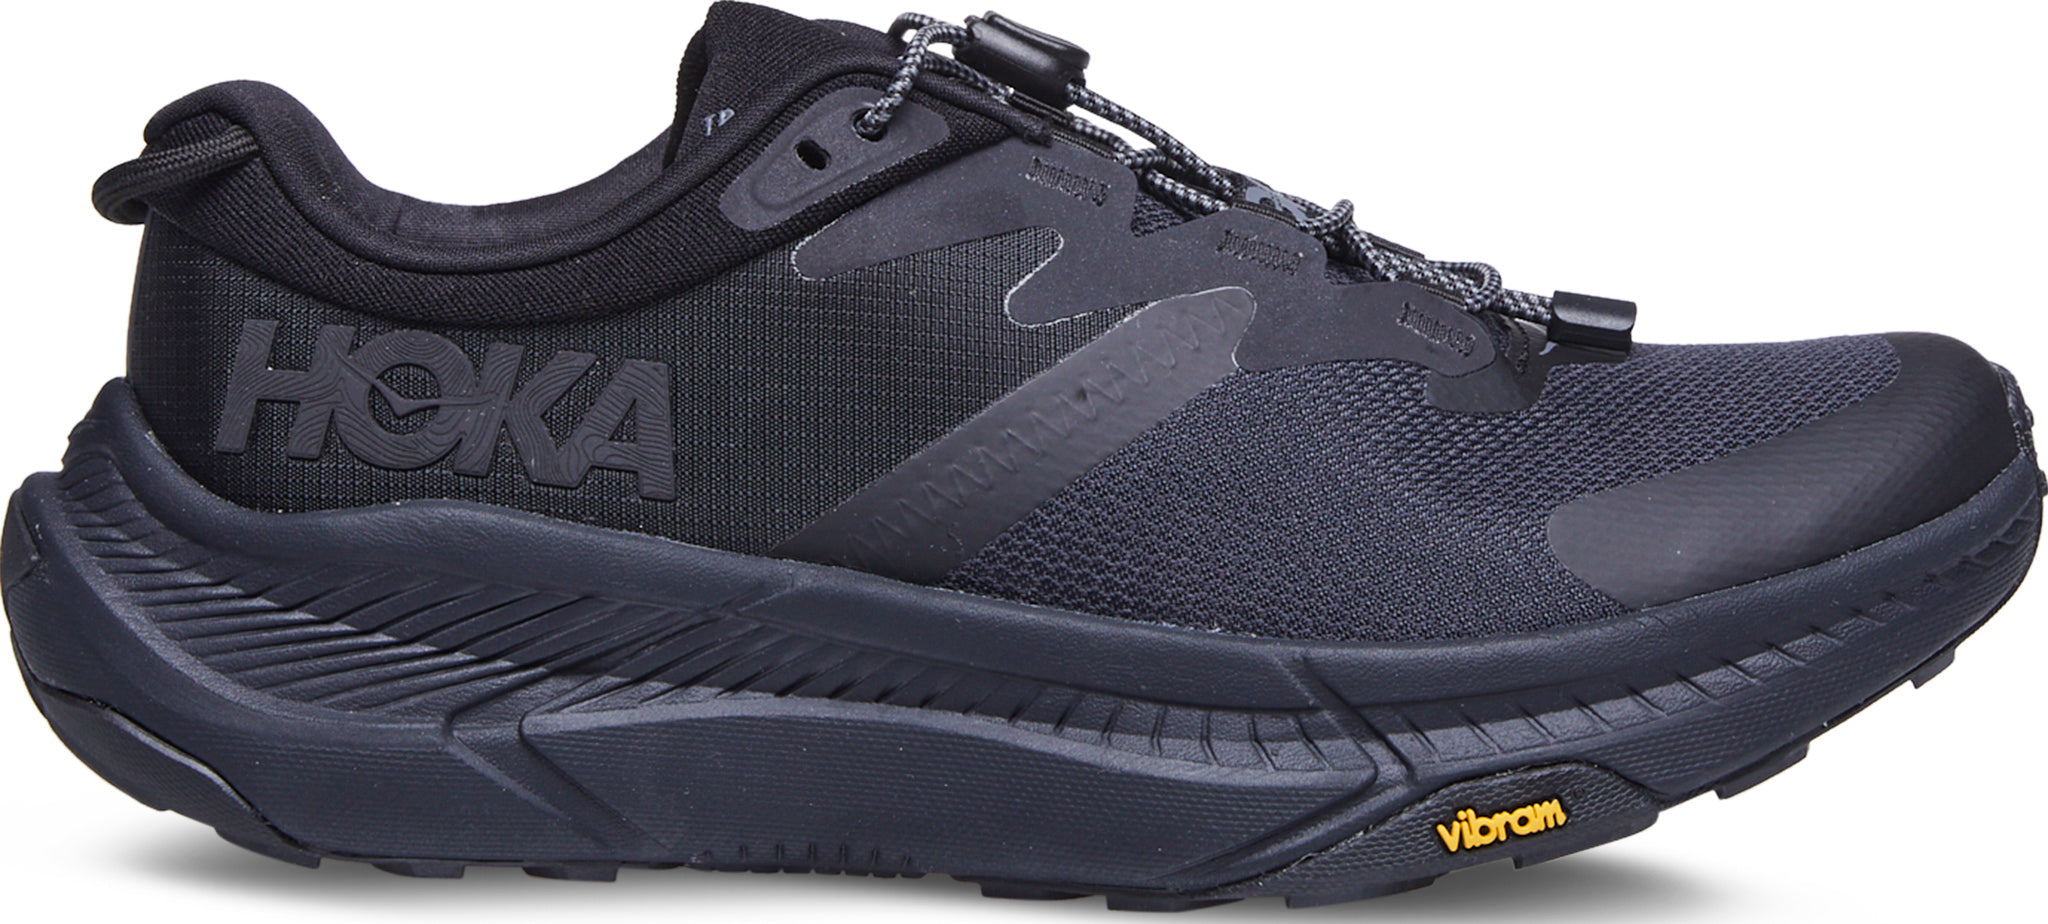 Hoka One One Canada - chaussures de course homme femme